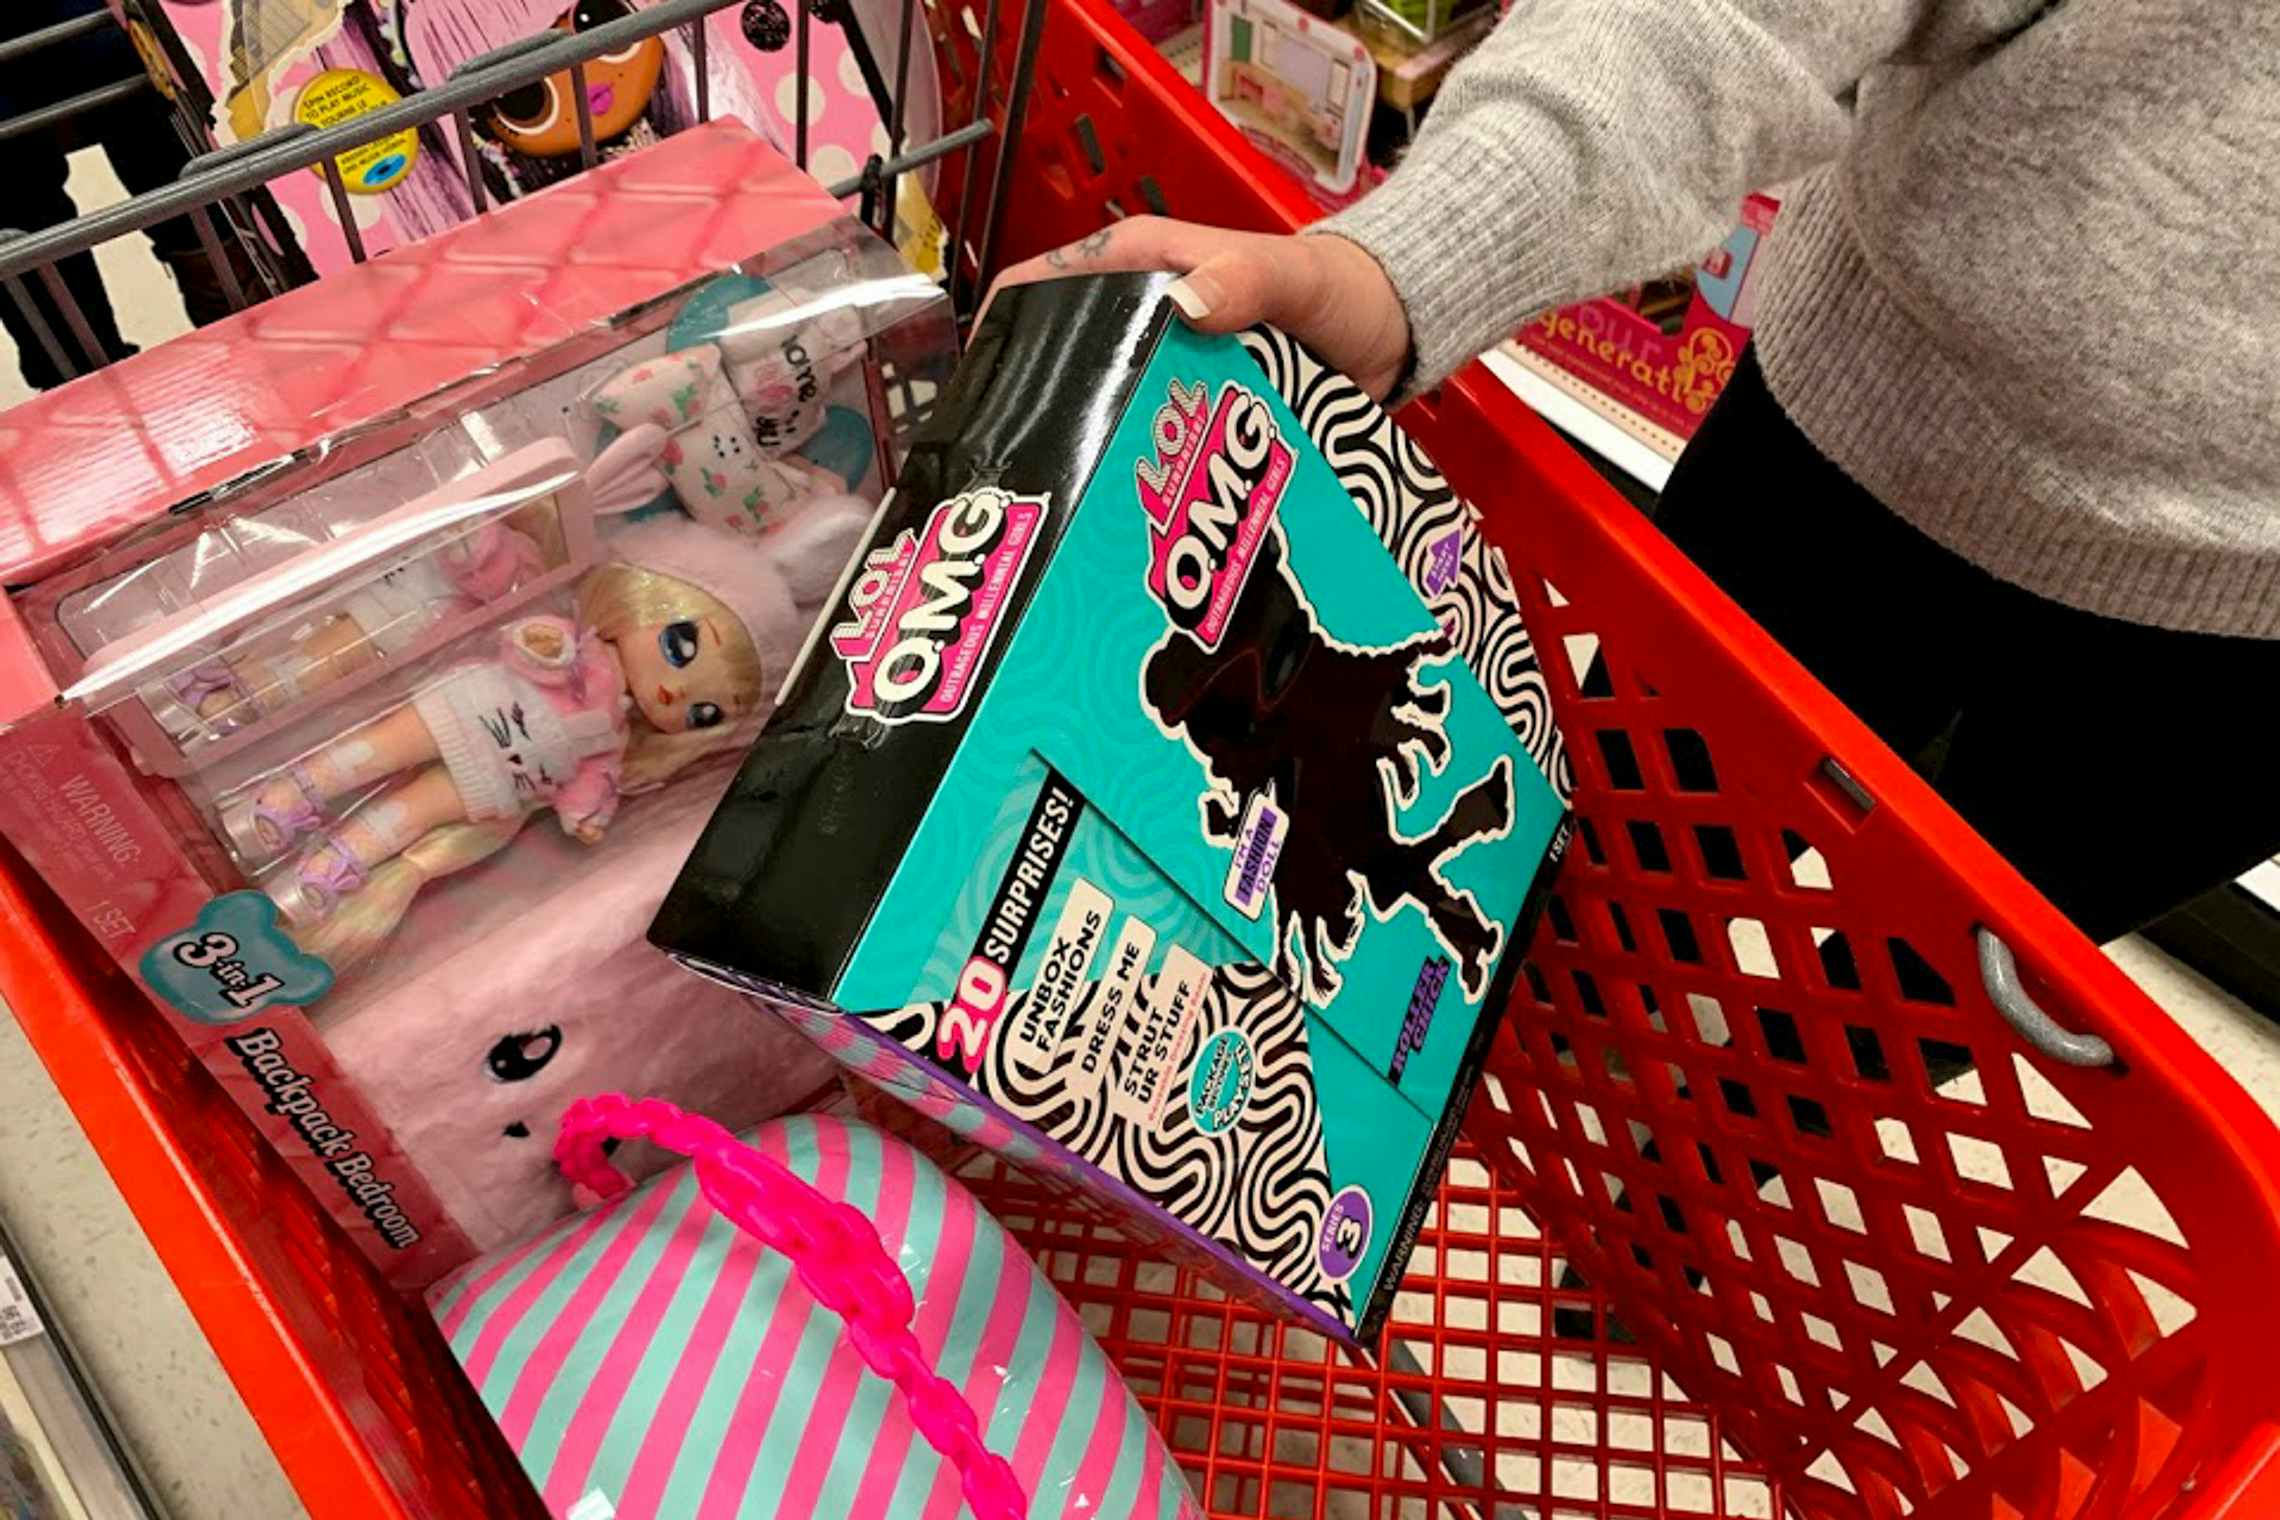 Woman loading her shopping cart at target with LOL Surprise doll toys